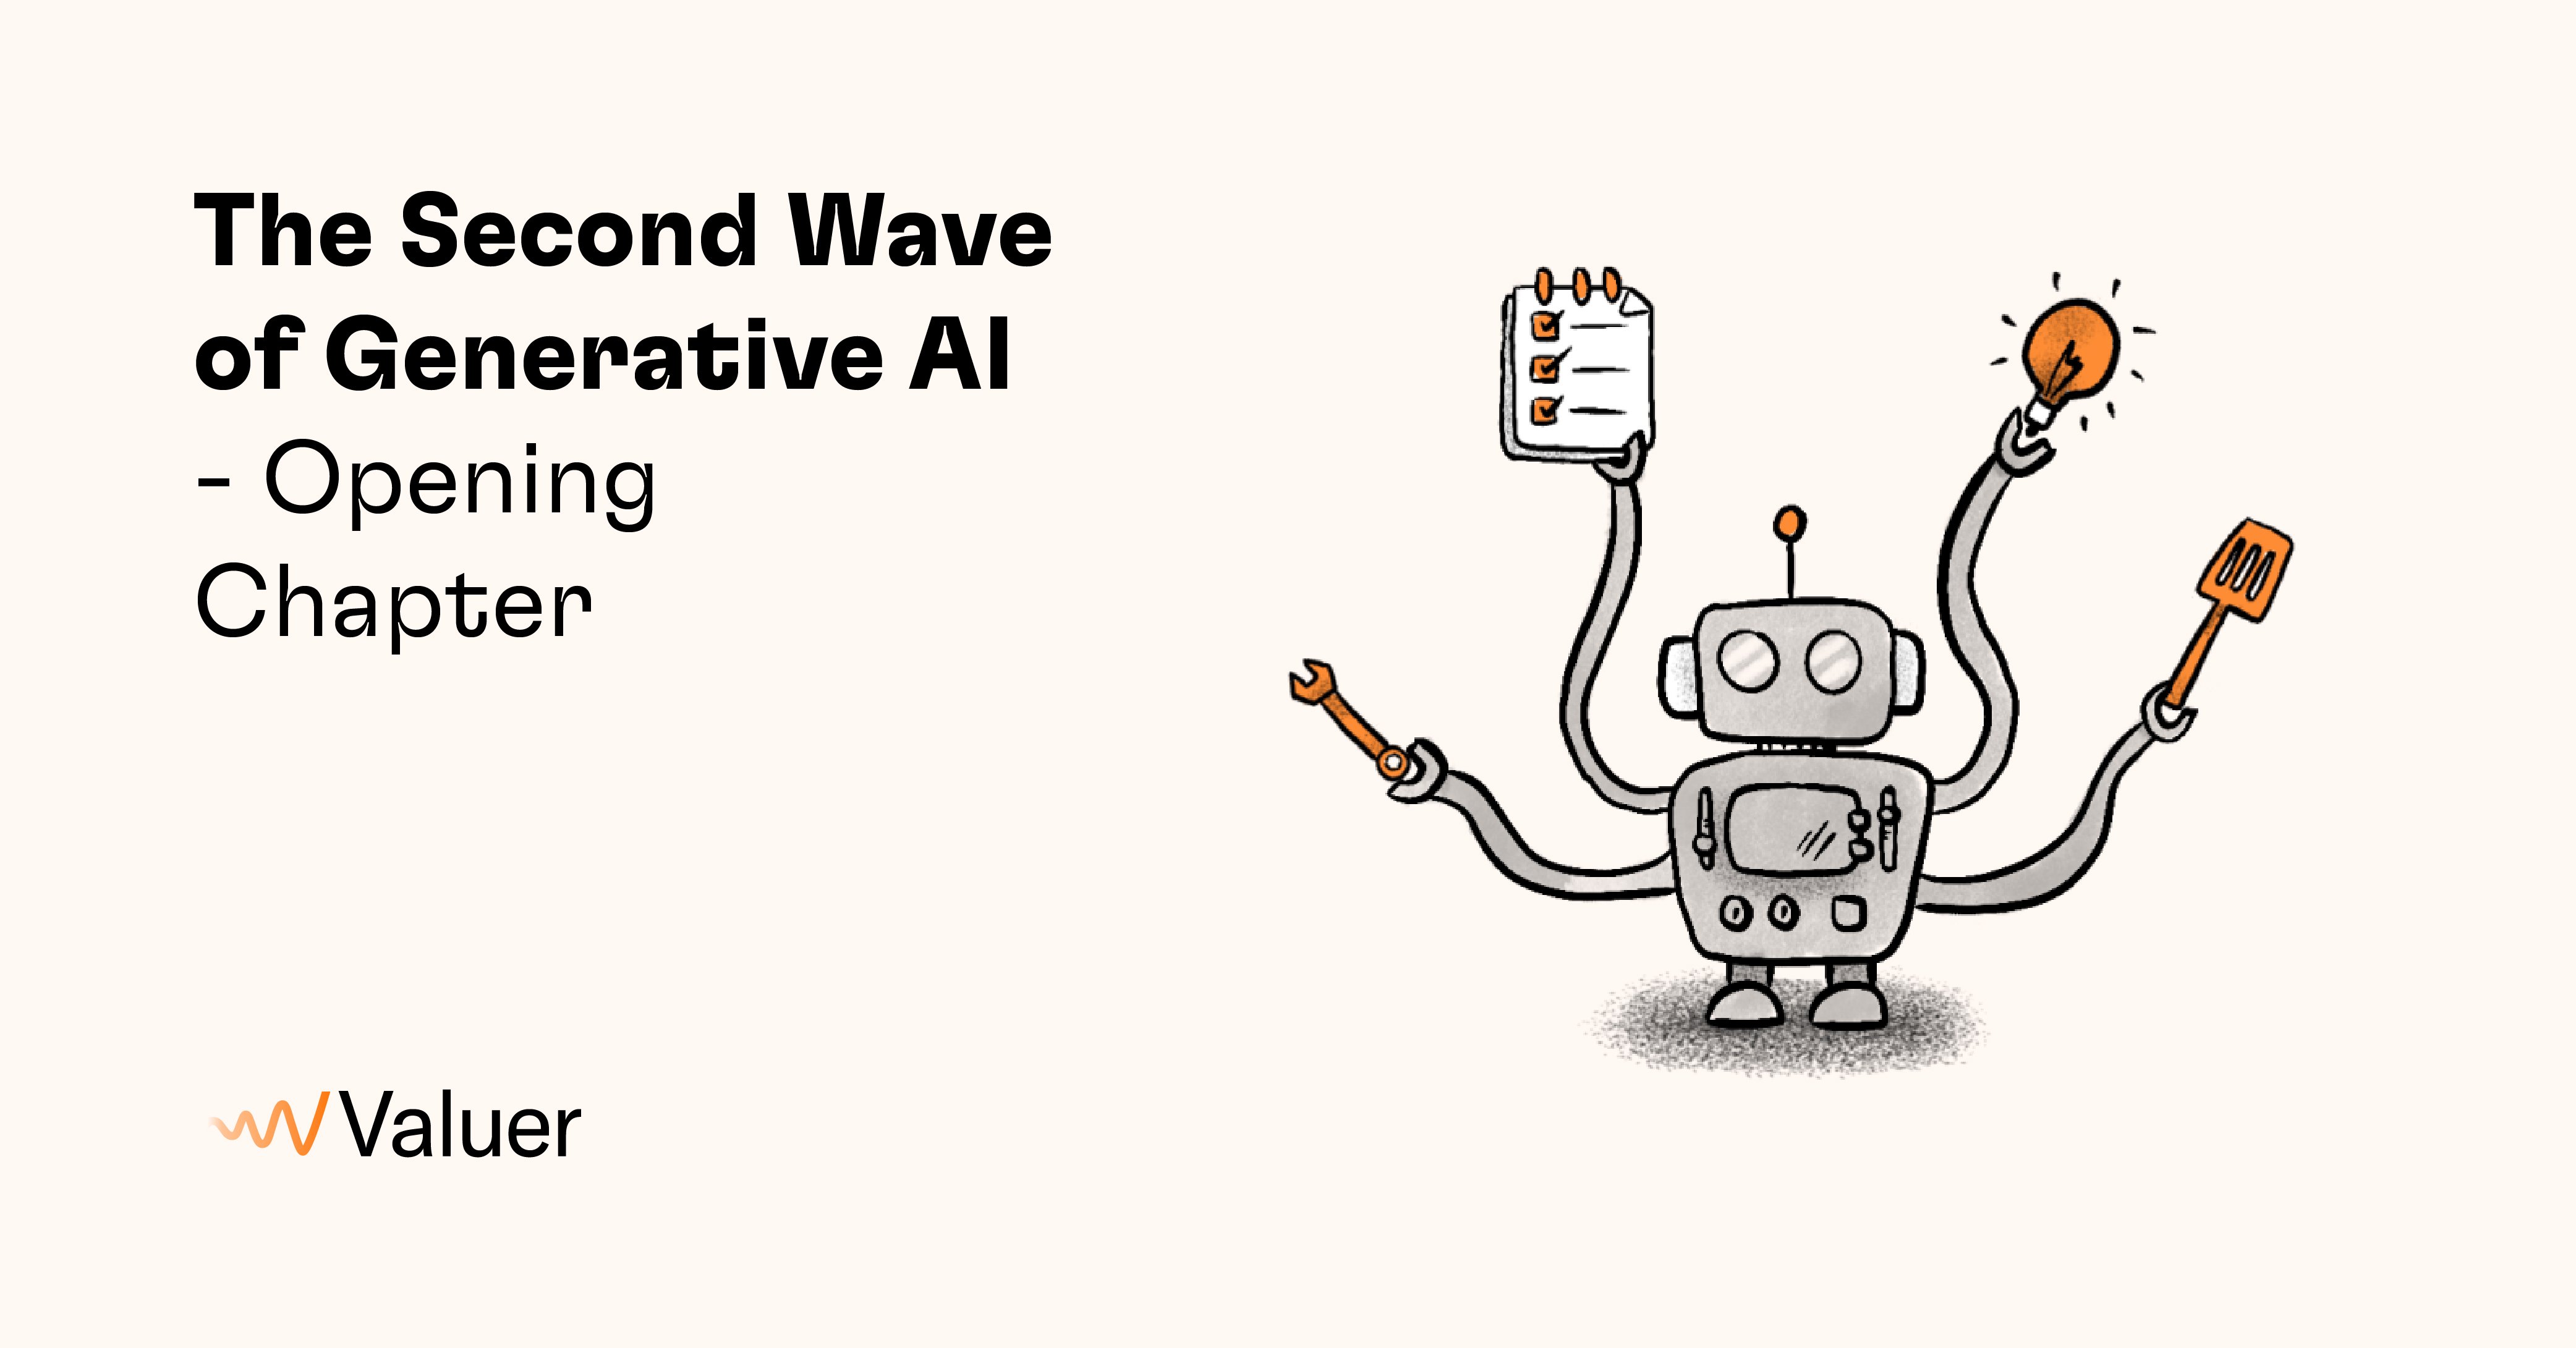 The Second Wave of Generative AI - Opening Chapter